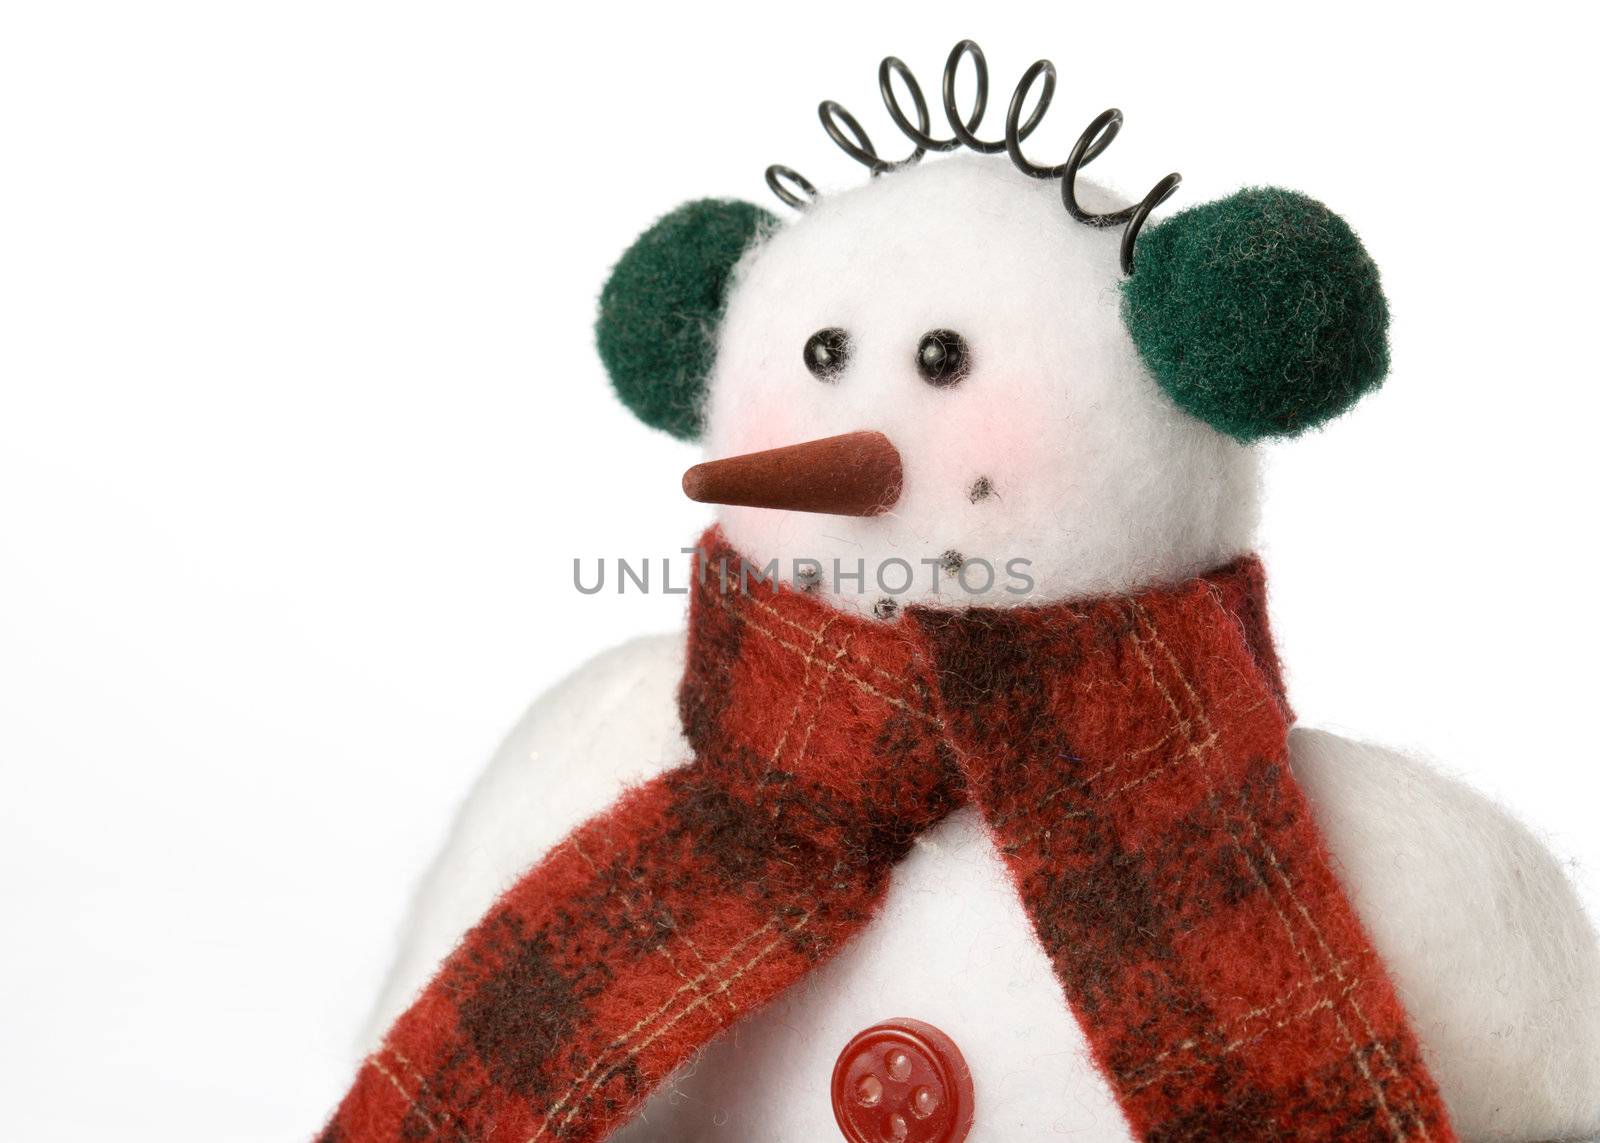 Snowman soft toy by RuthBlack